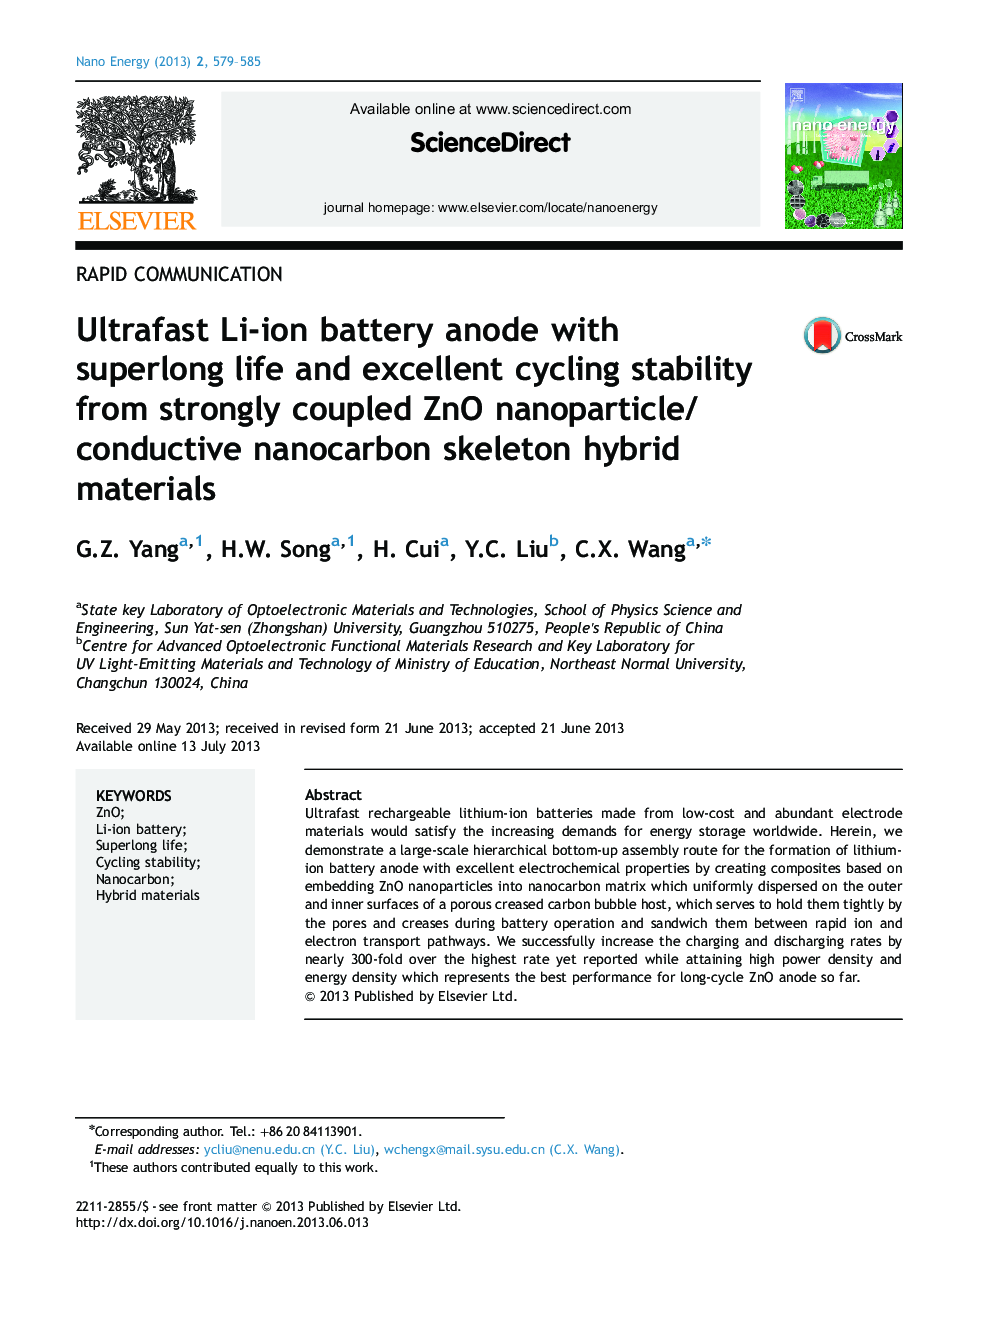 Ultrafast Li-ion battery anode with superlong life and excellent cycling stability from strongly coupled ZnO nanoparticle/conductive nanocarbon skeleton hybrid materials